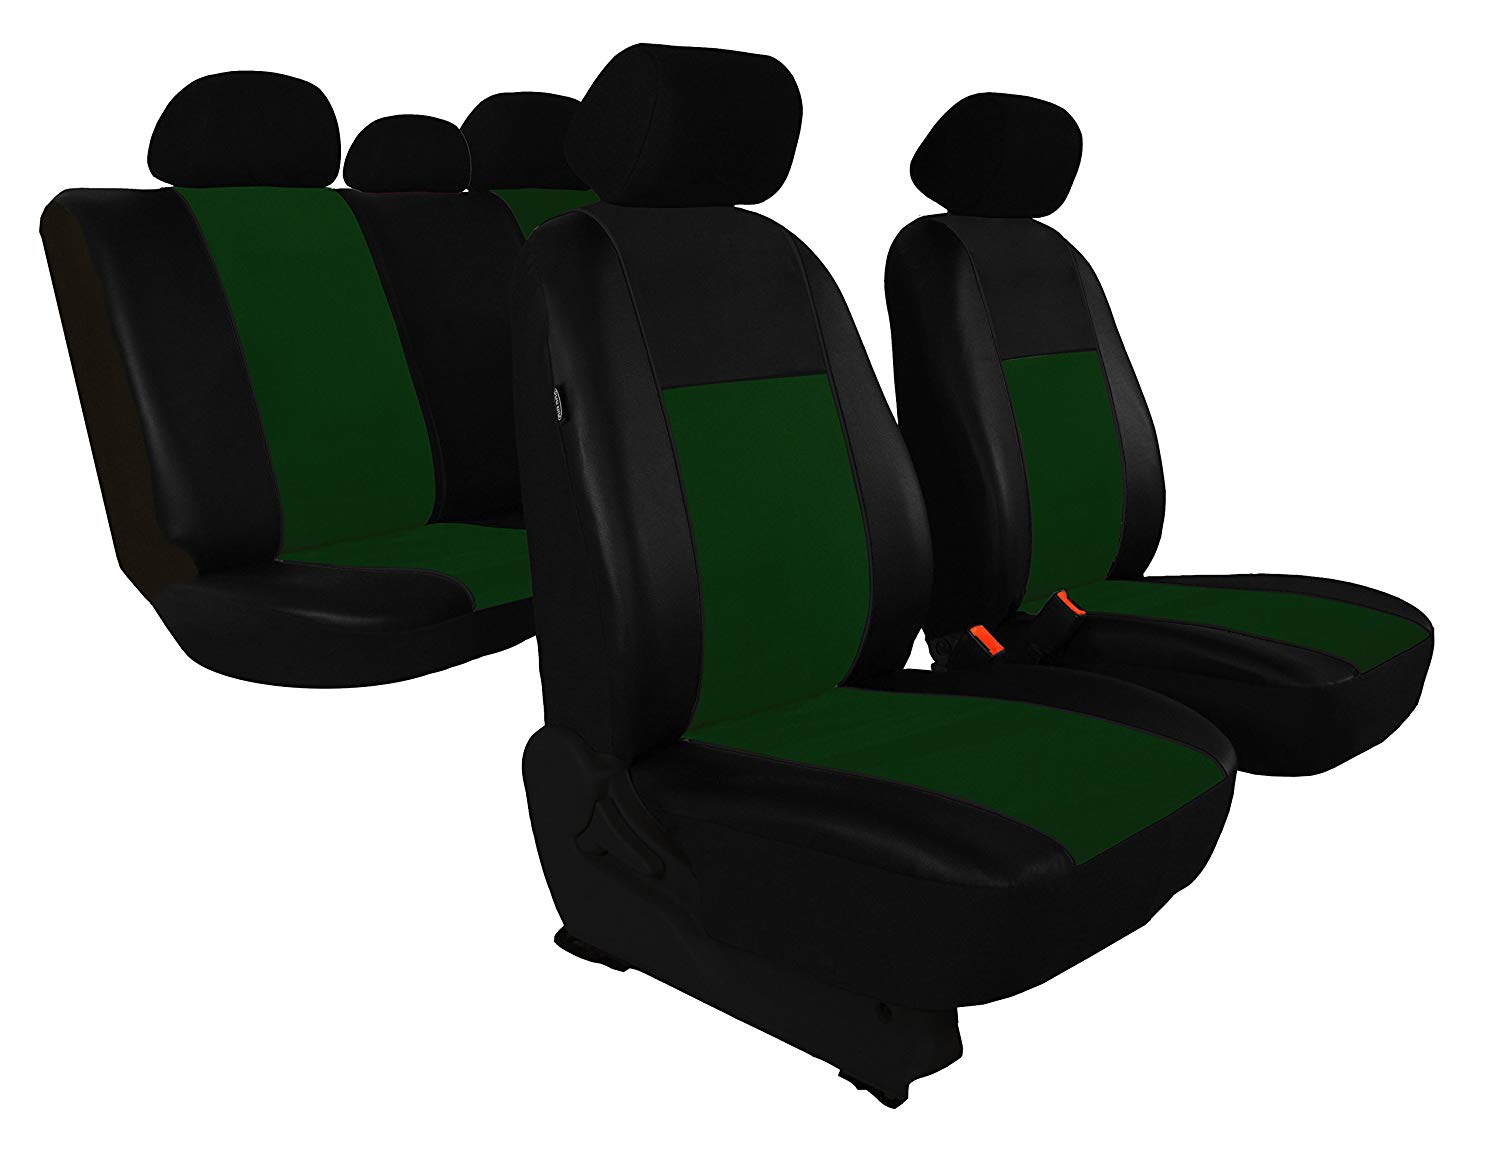 \'SEAT COVER Hyundai i40 from 2011 2015 Green \"Unico (Available in 7 Colours Other Offers in this listing).